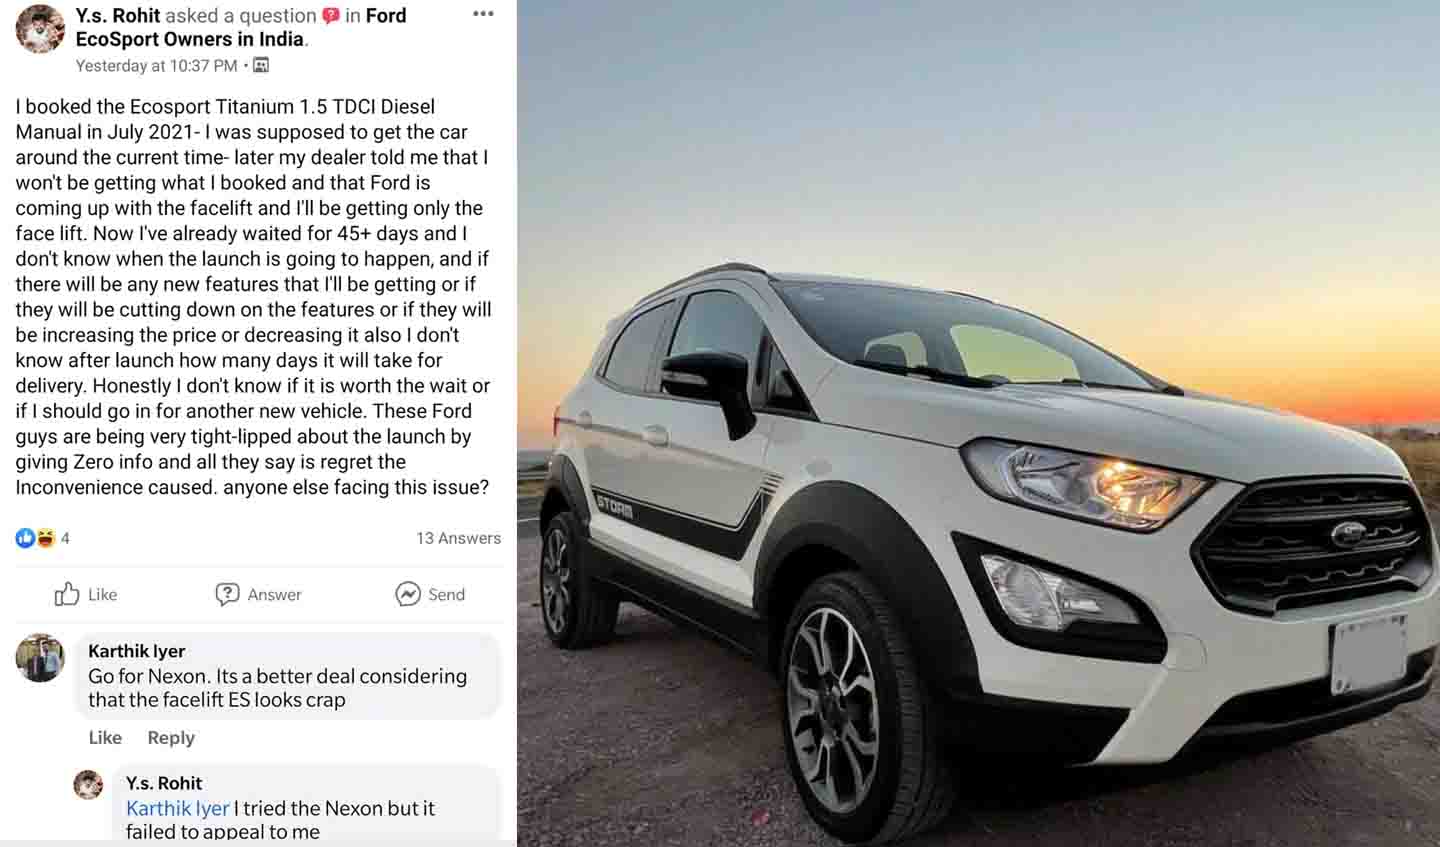 Vendor Refuses Supply of Ford EcoSport Till Launch of Facelift